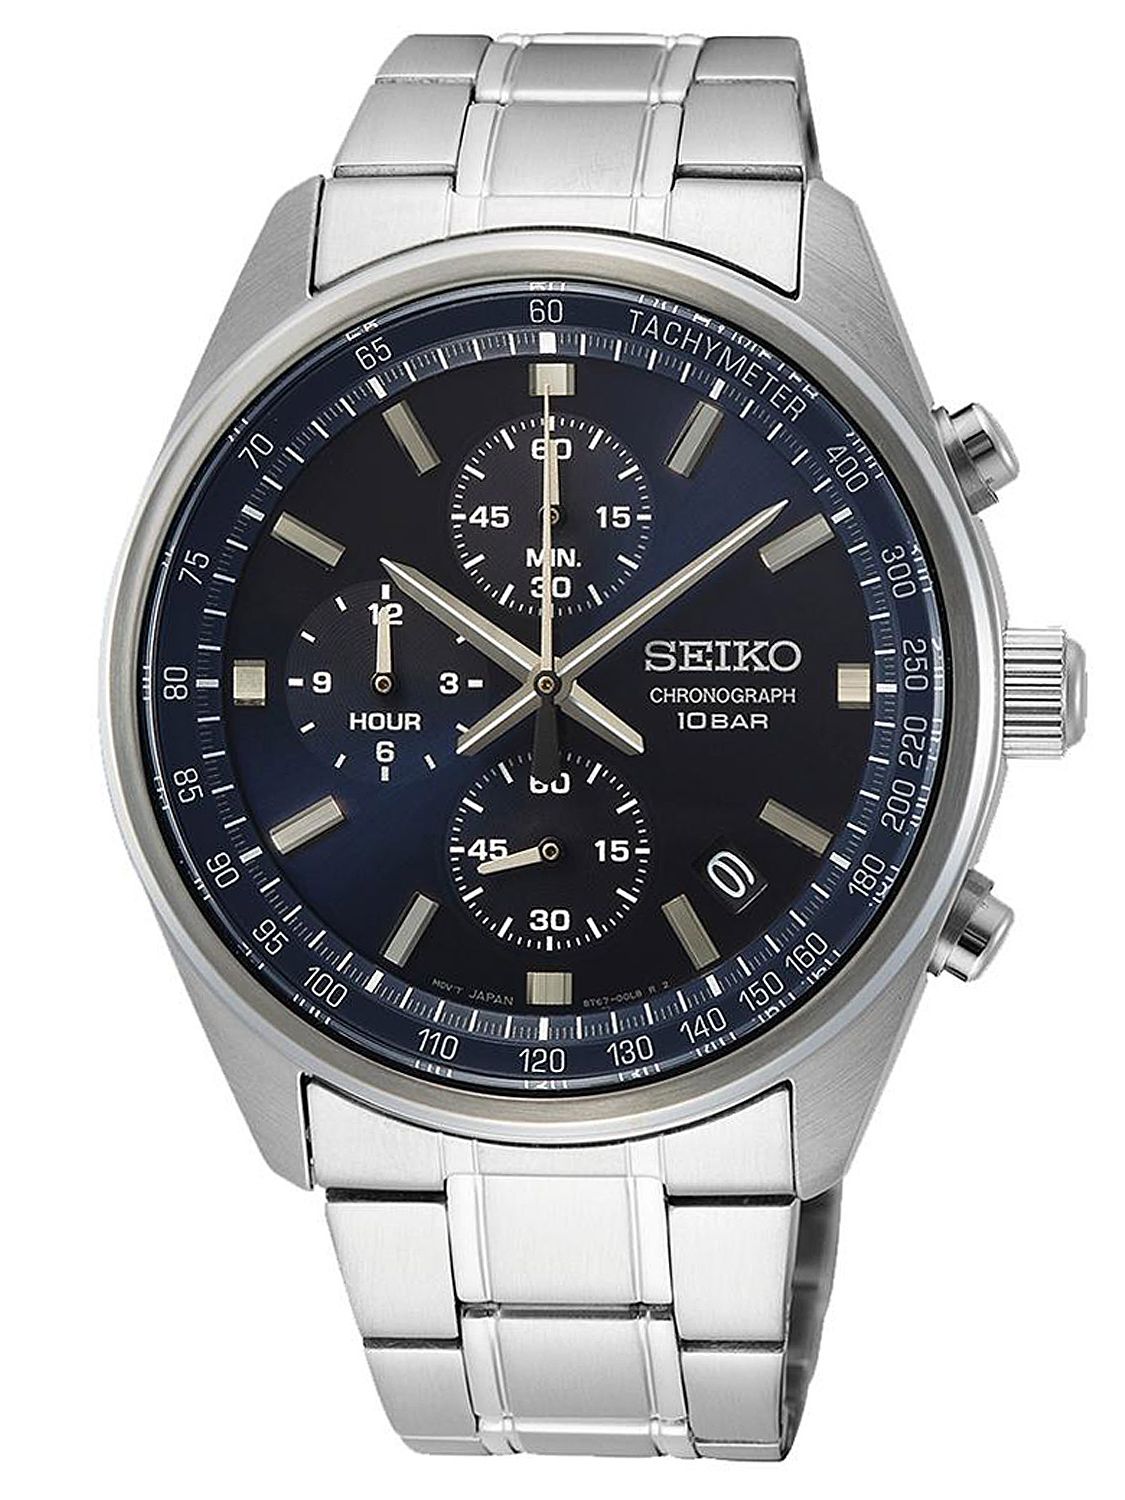 Seiko SSB377P1 Chronograph Men's Watch with Stainless Steel Bracelet